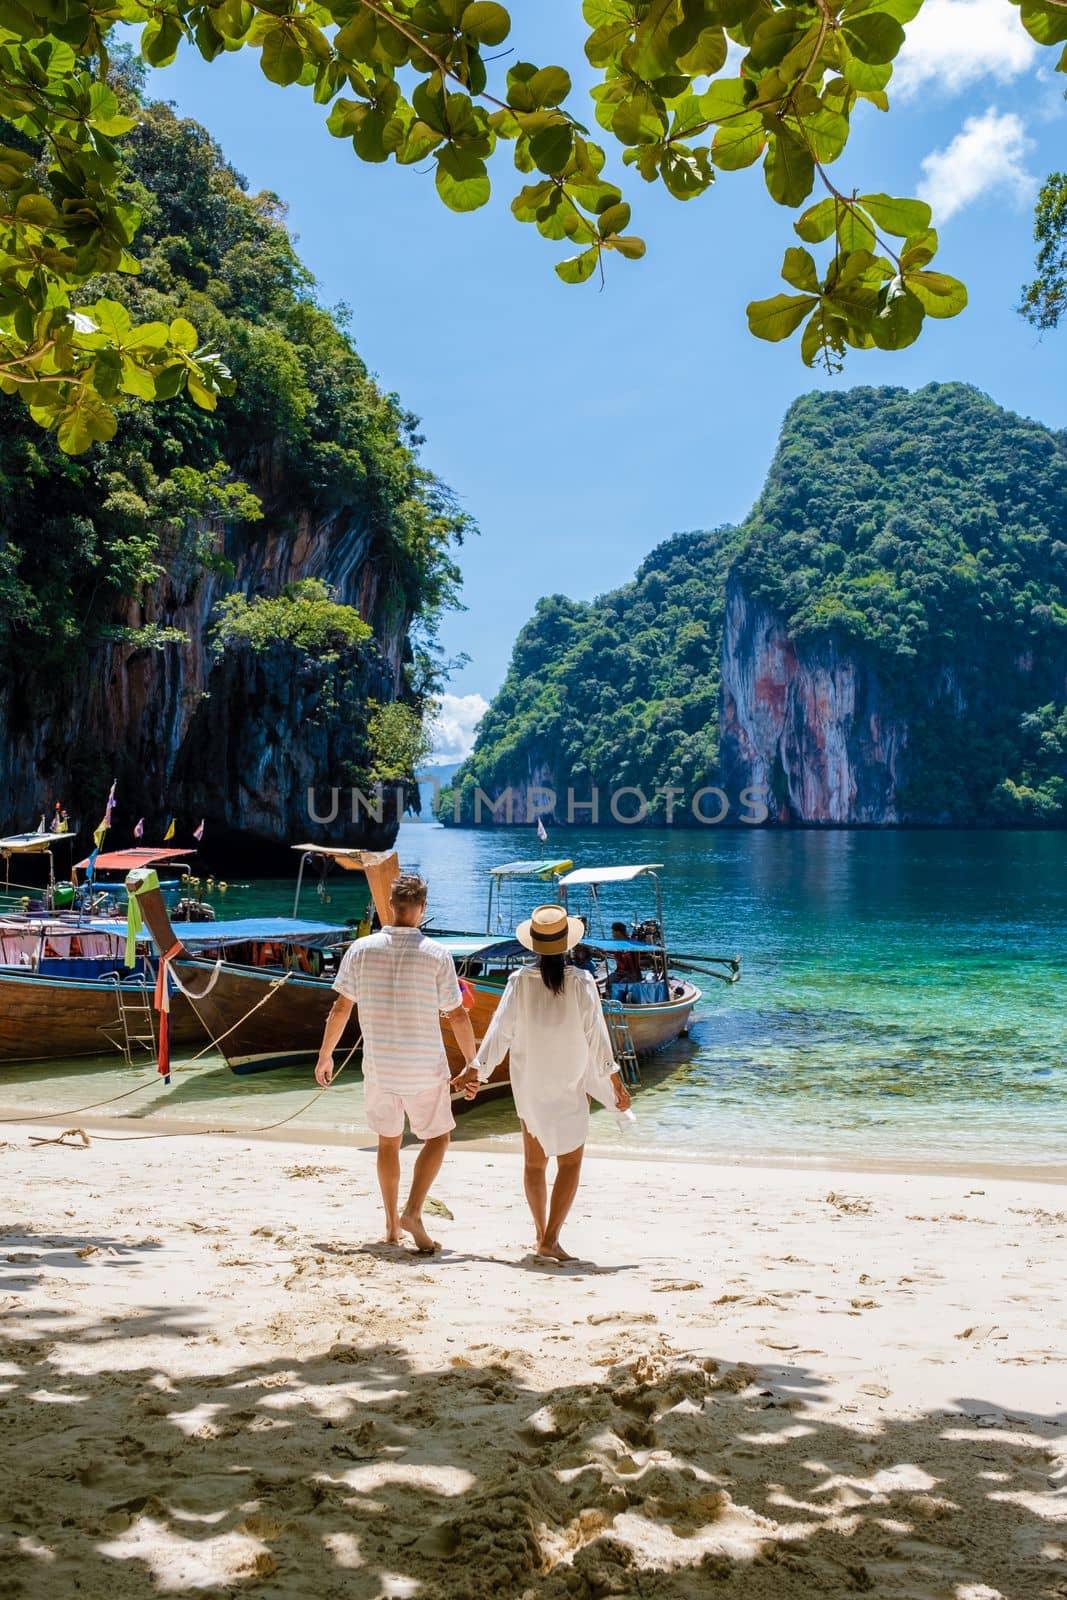 Men and women at the Tropical lagoon of Koh Loa Lading Krabi Thailand part of the Koh Hong Islands in Thailand. beautiful beach with limestone cliffs and longtail boats